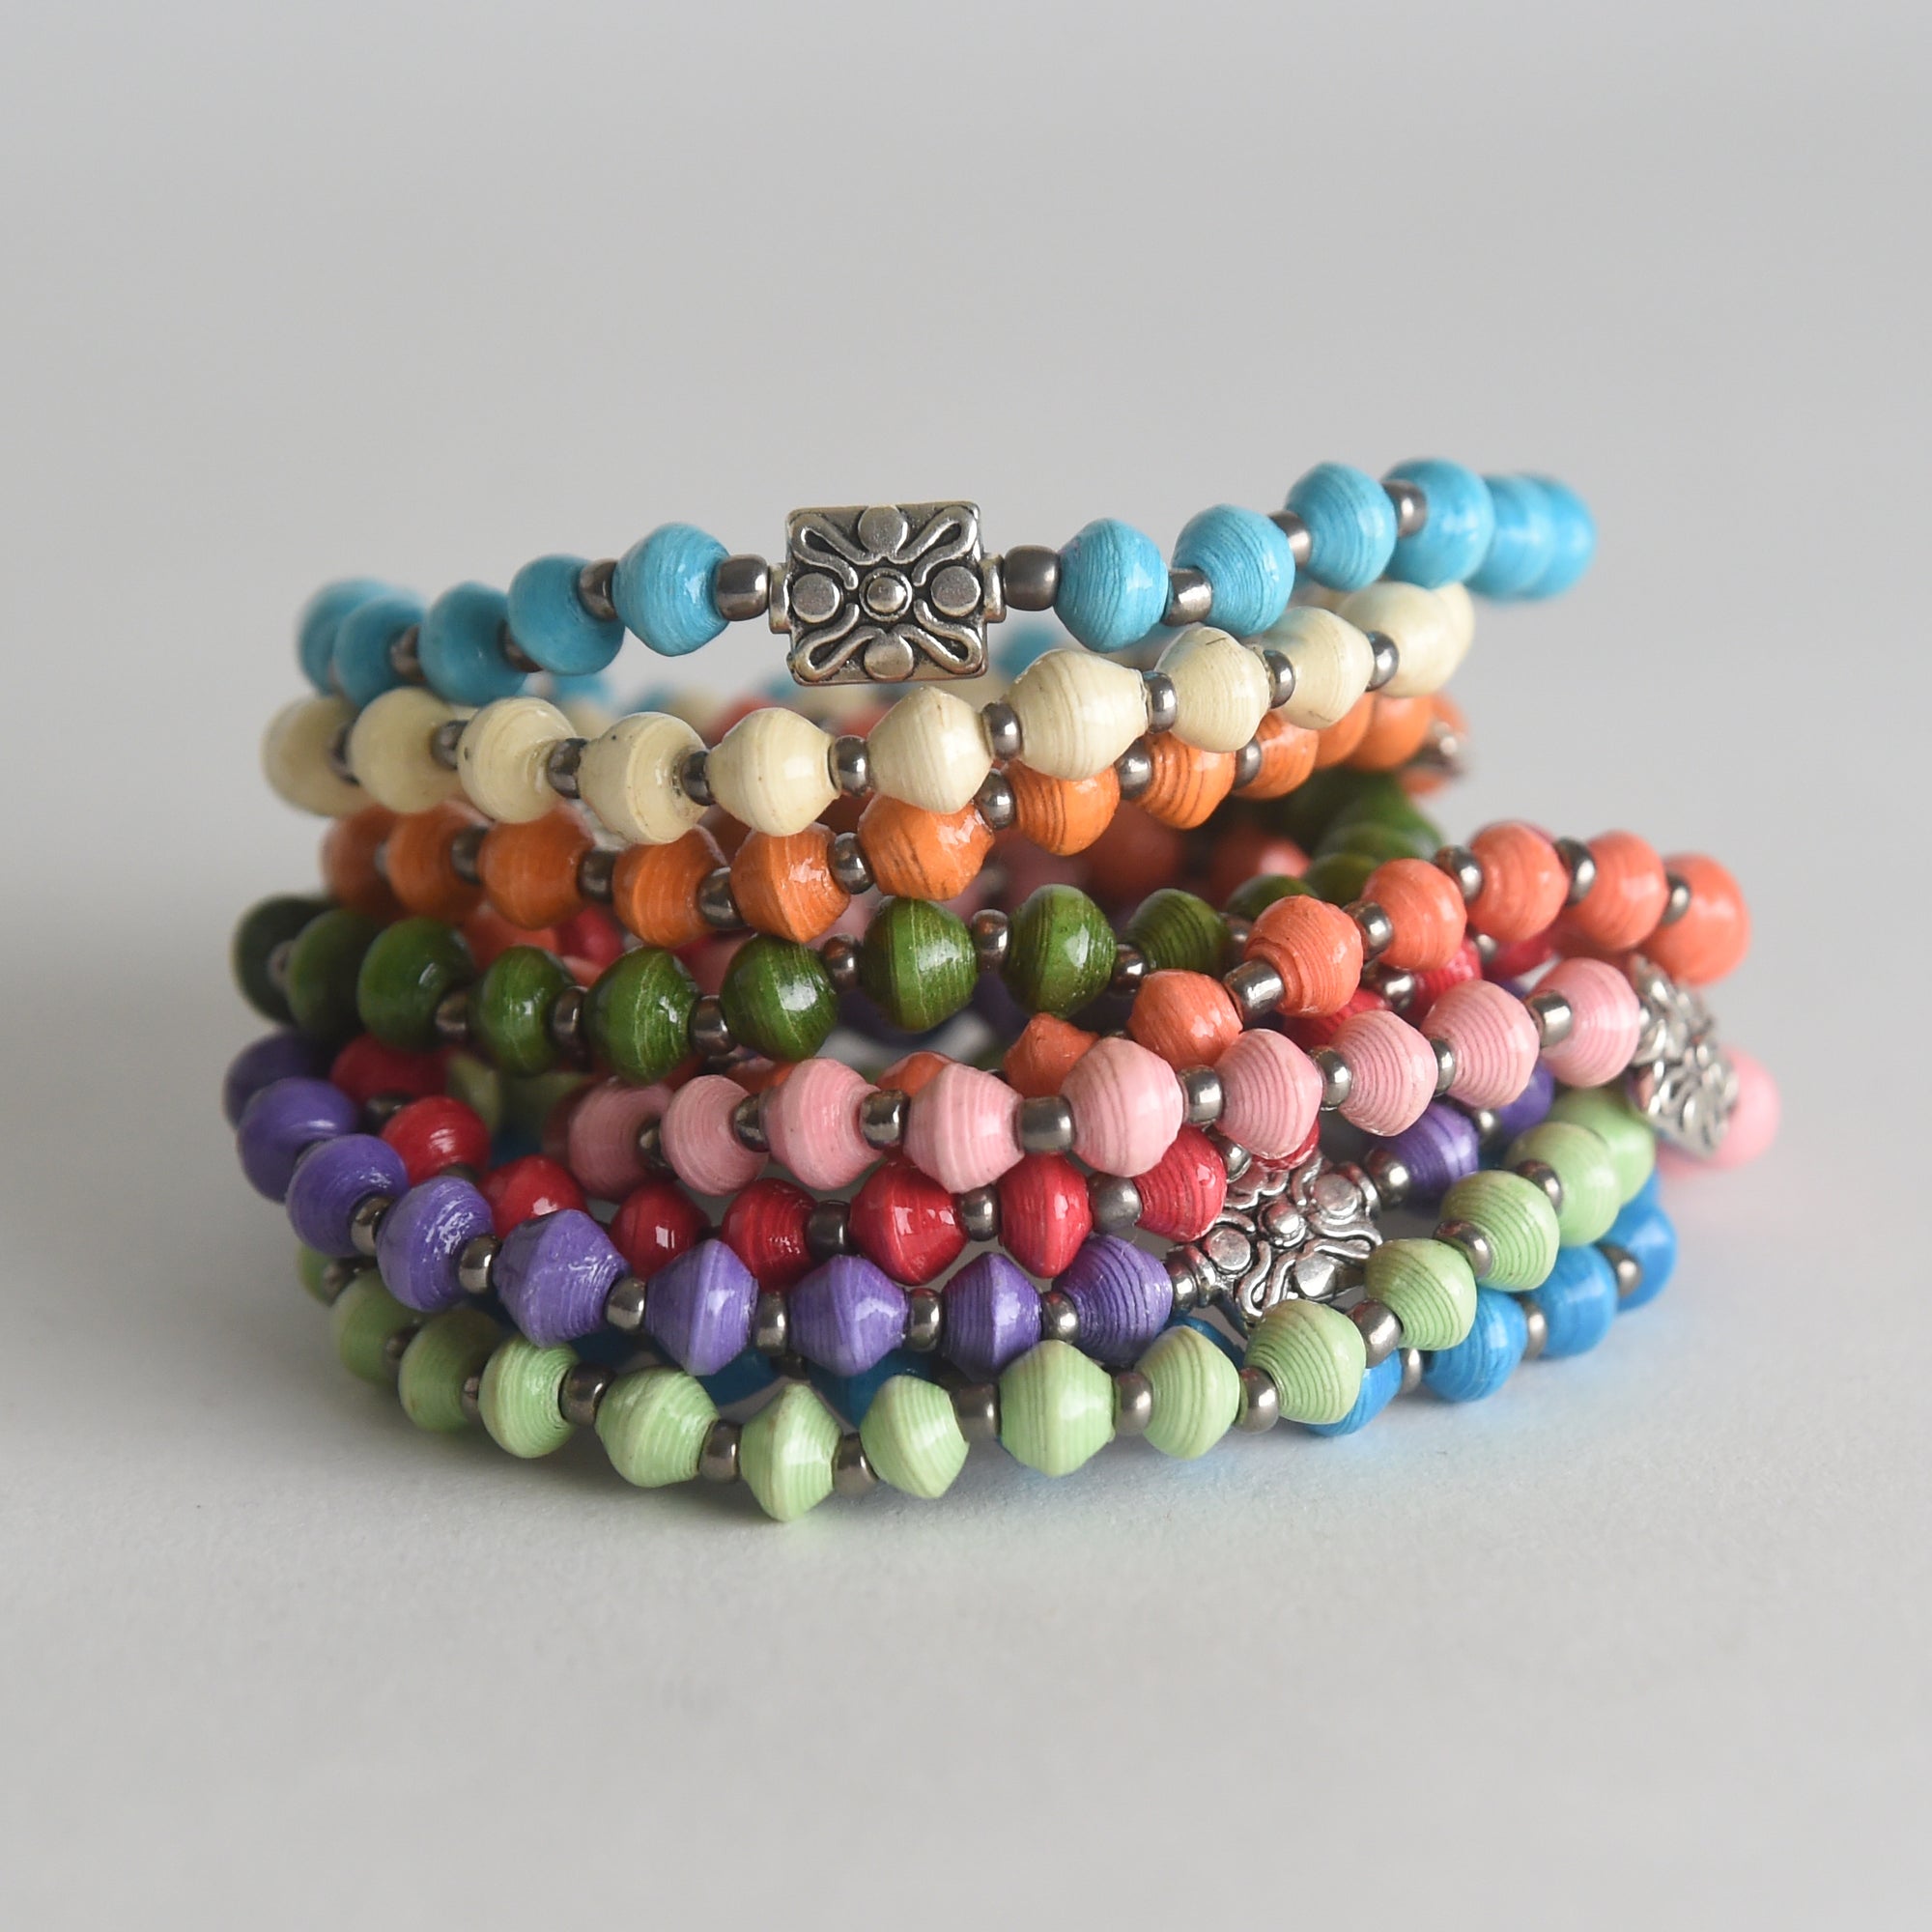 Ethically made paper bead bracelets - Project Have Hope